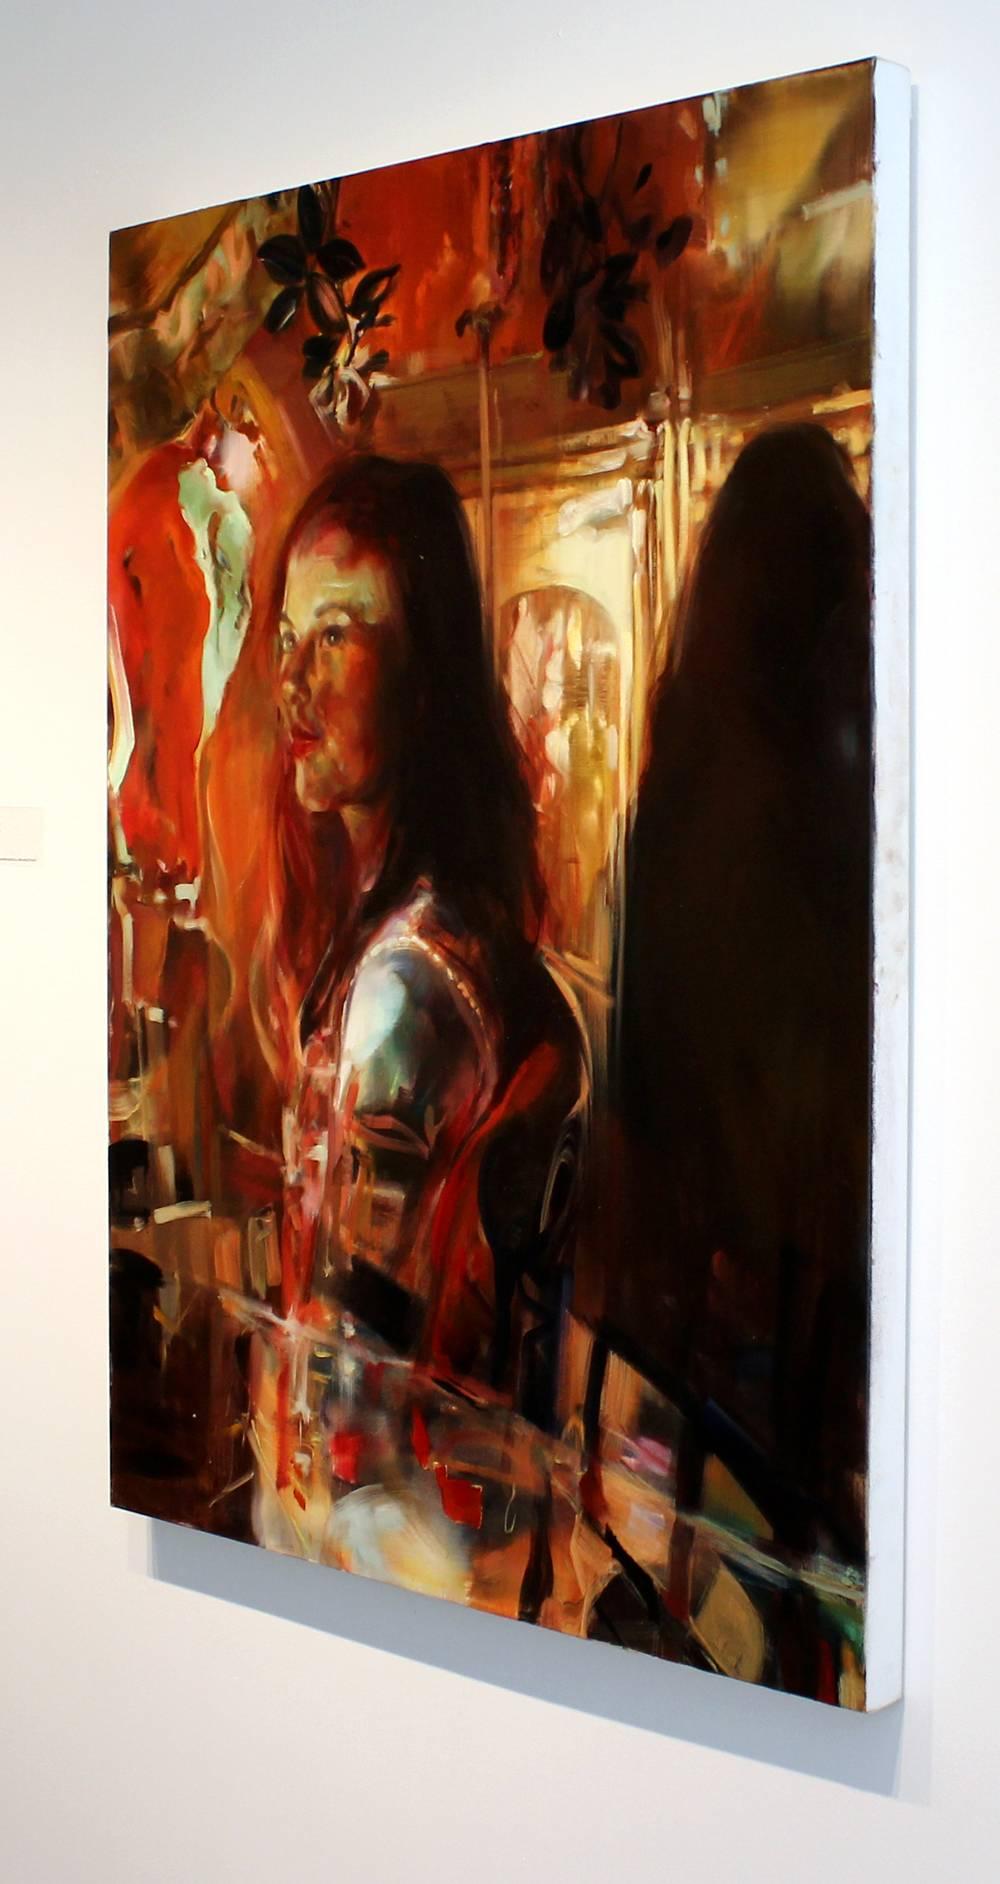 Ruby Diamond, figurative oil painting on canvas - Contemporary Painting by Marilyn McAvoy